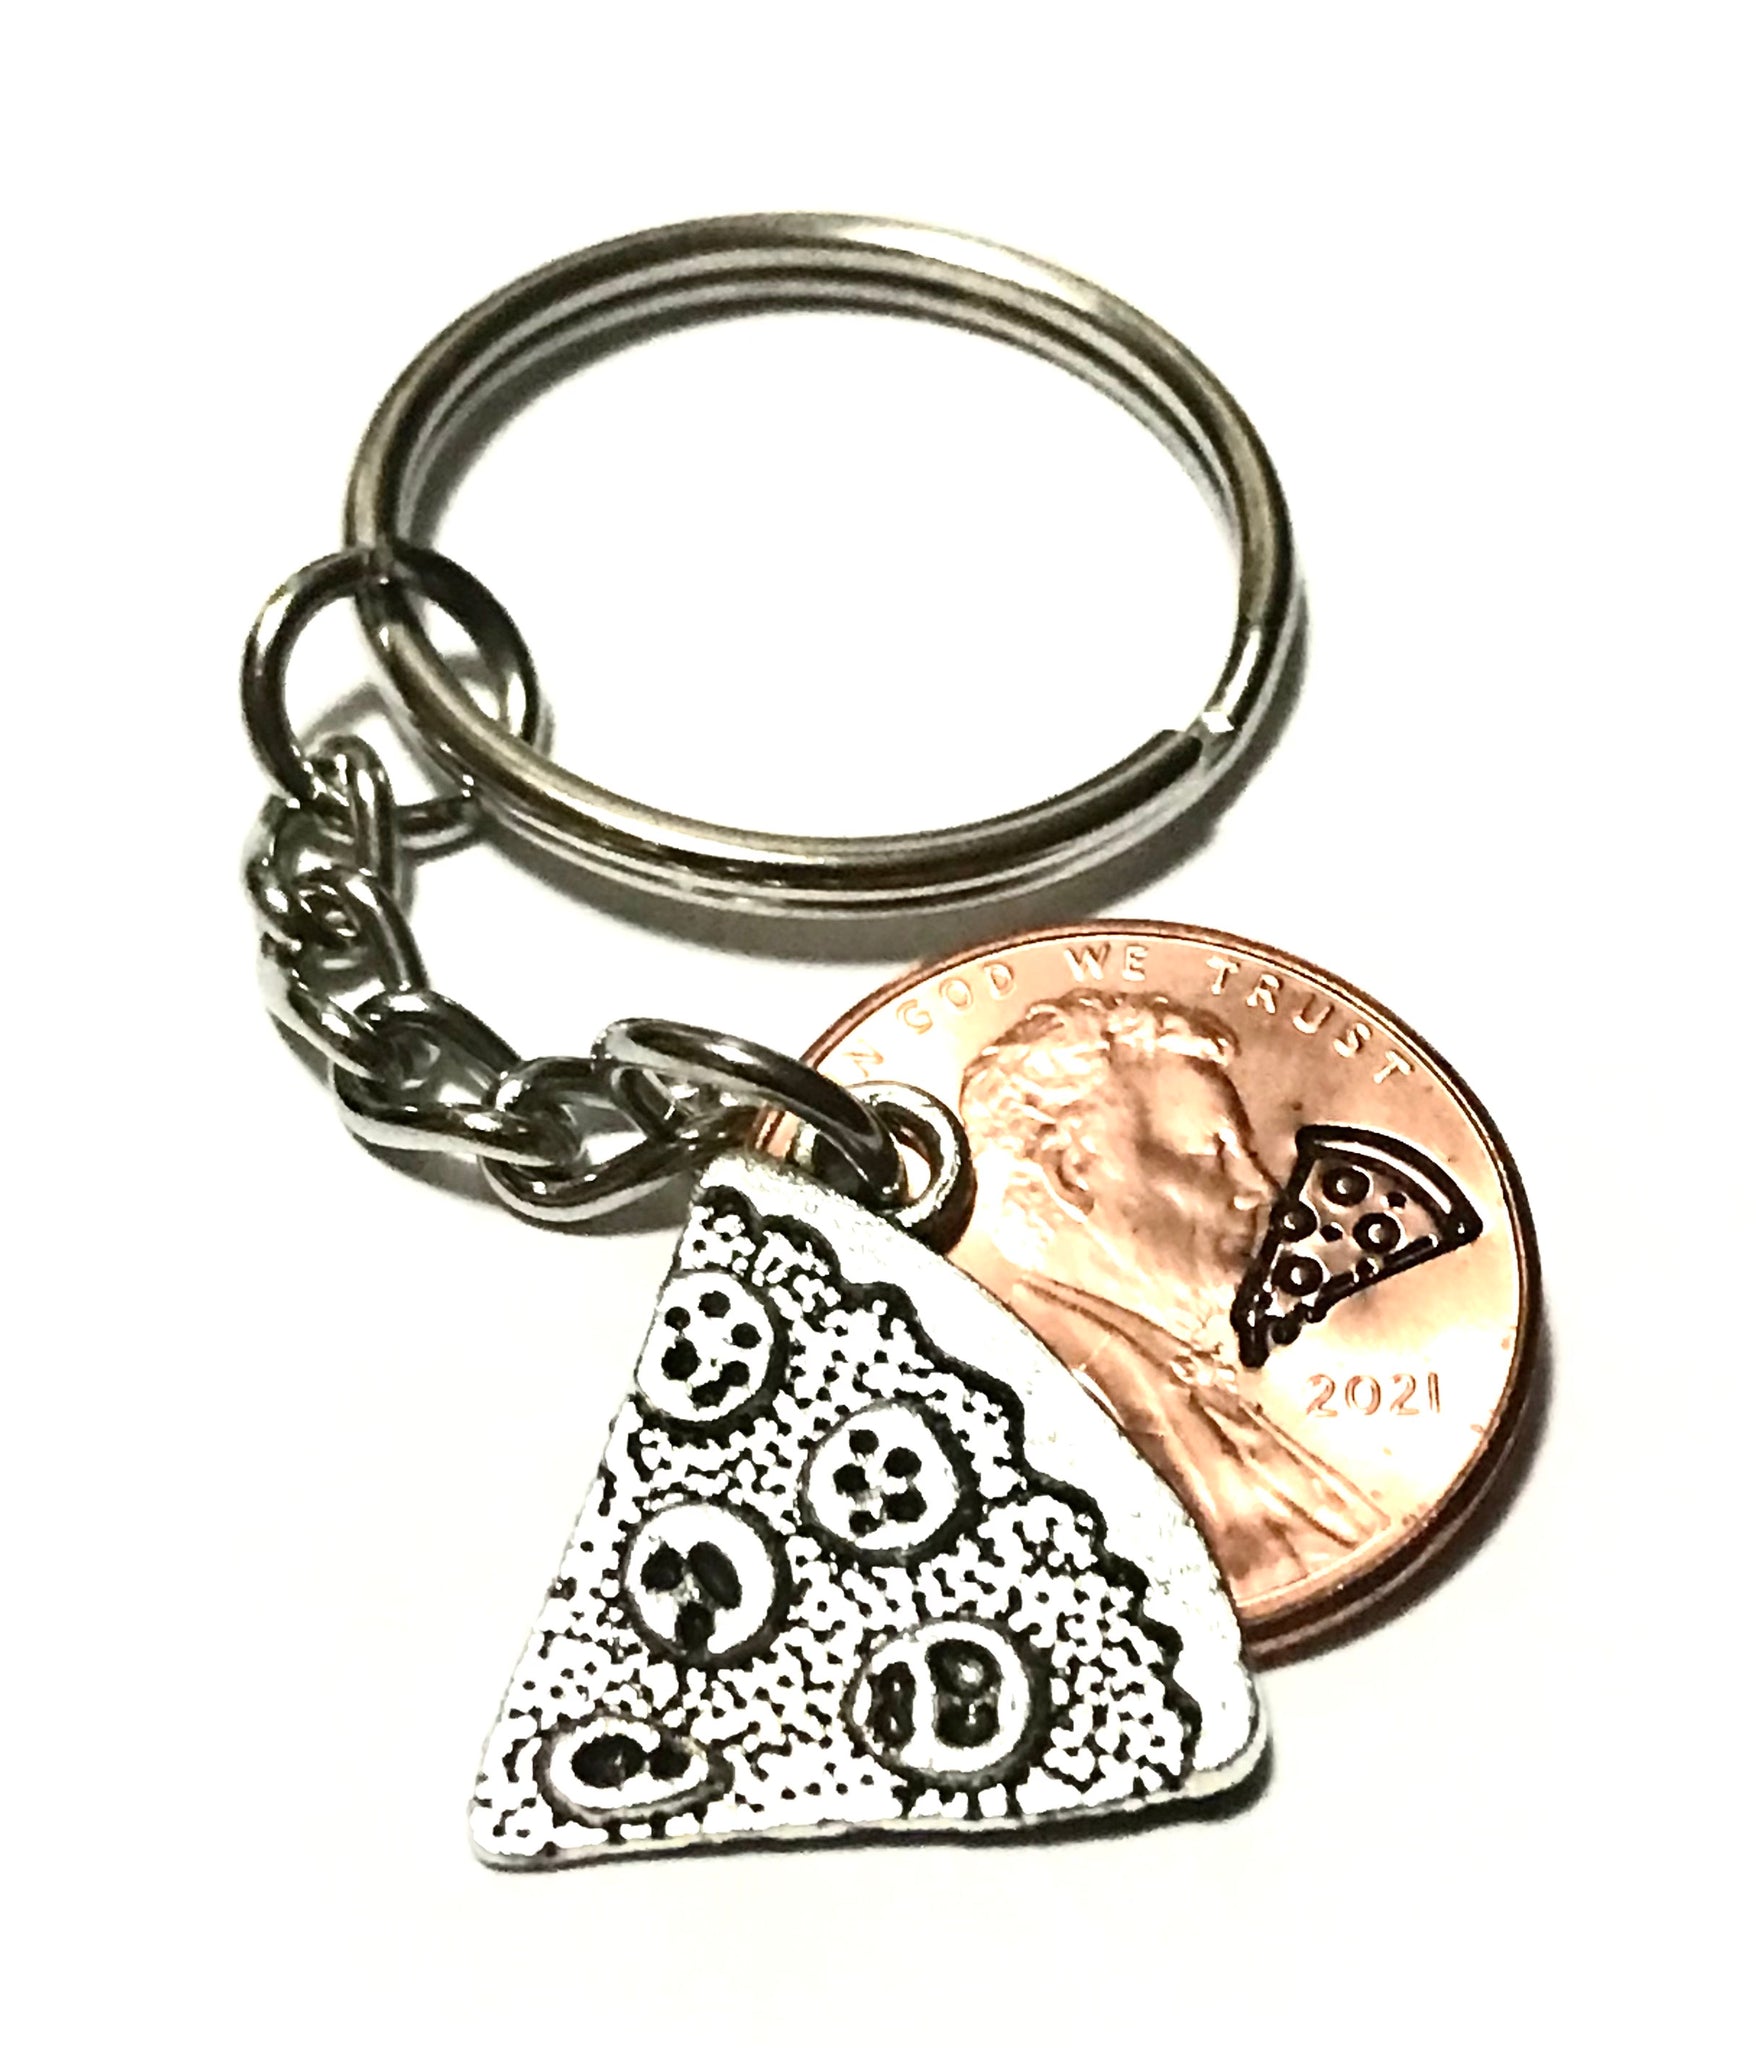 A Pizza Slice Silver Charm Lucky Penny Keychain with engraving of pizza slice above the date of a Lincoln Cent.